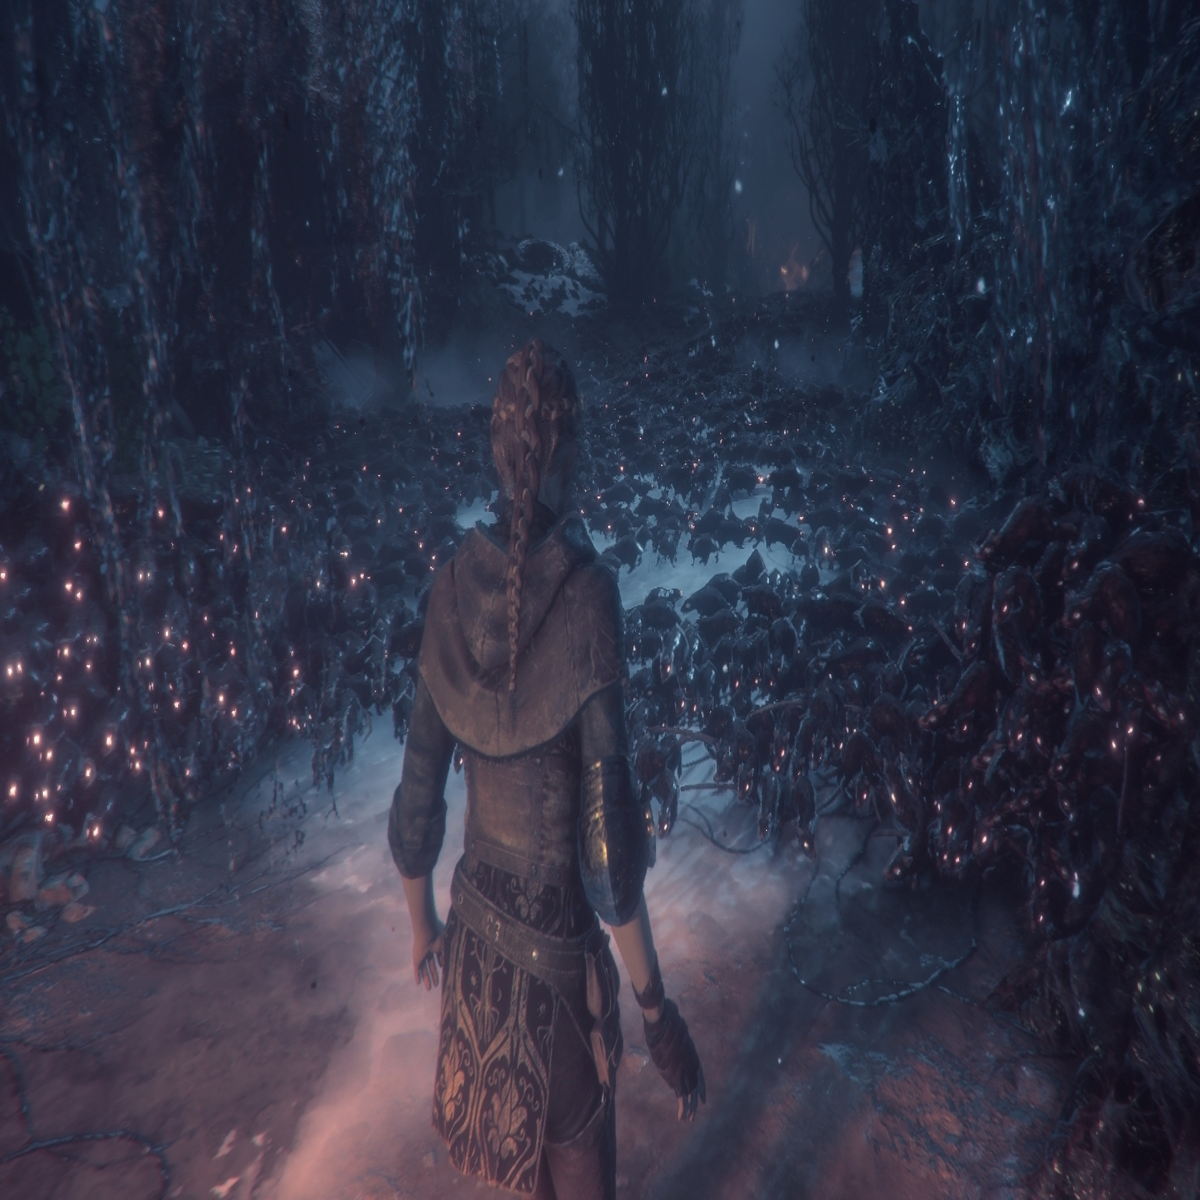 Rumour: A Plague Tale 2 is in development, will be revealed in 2020